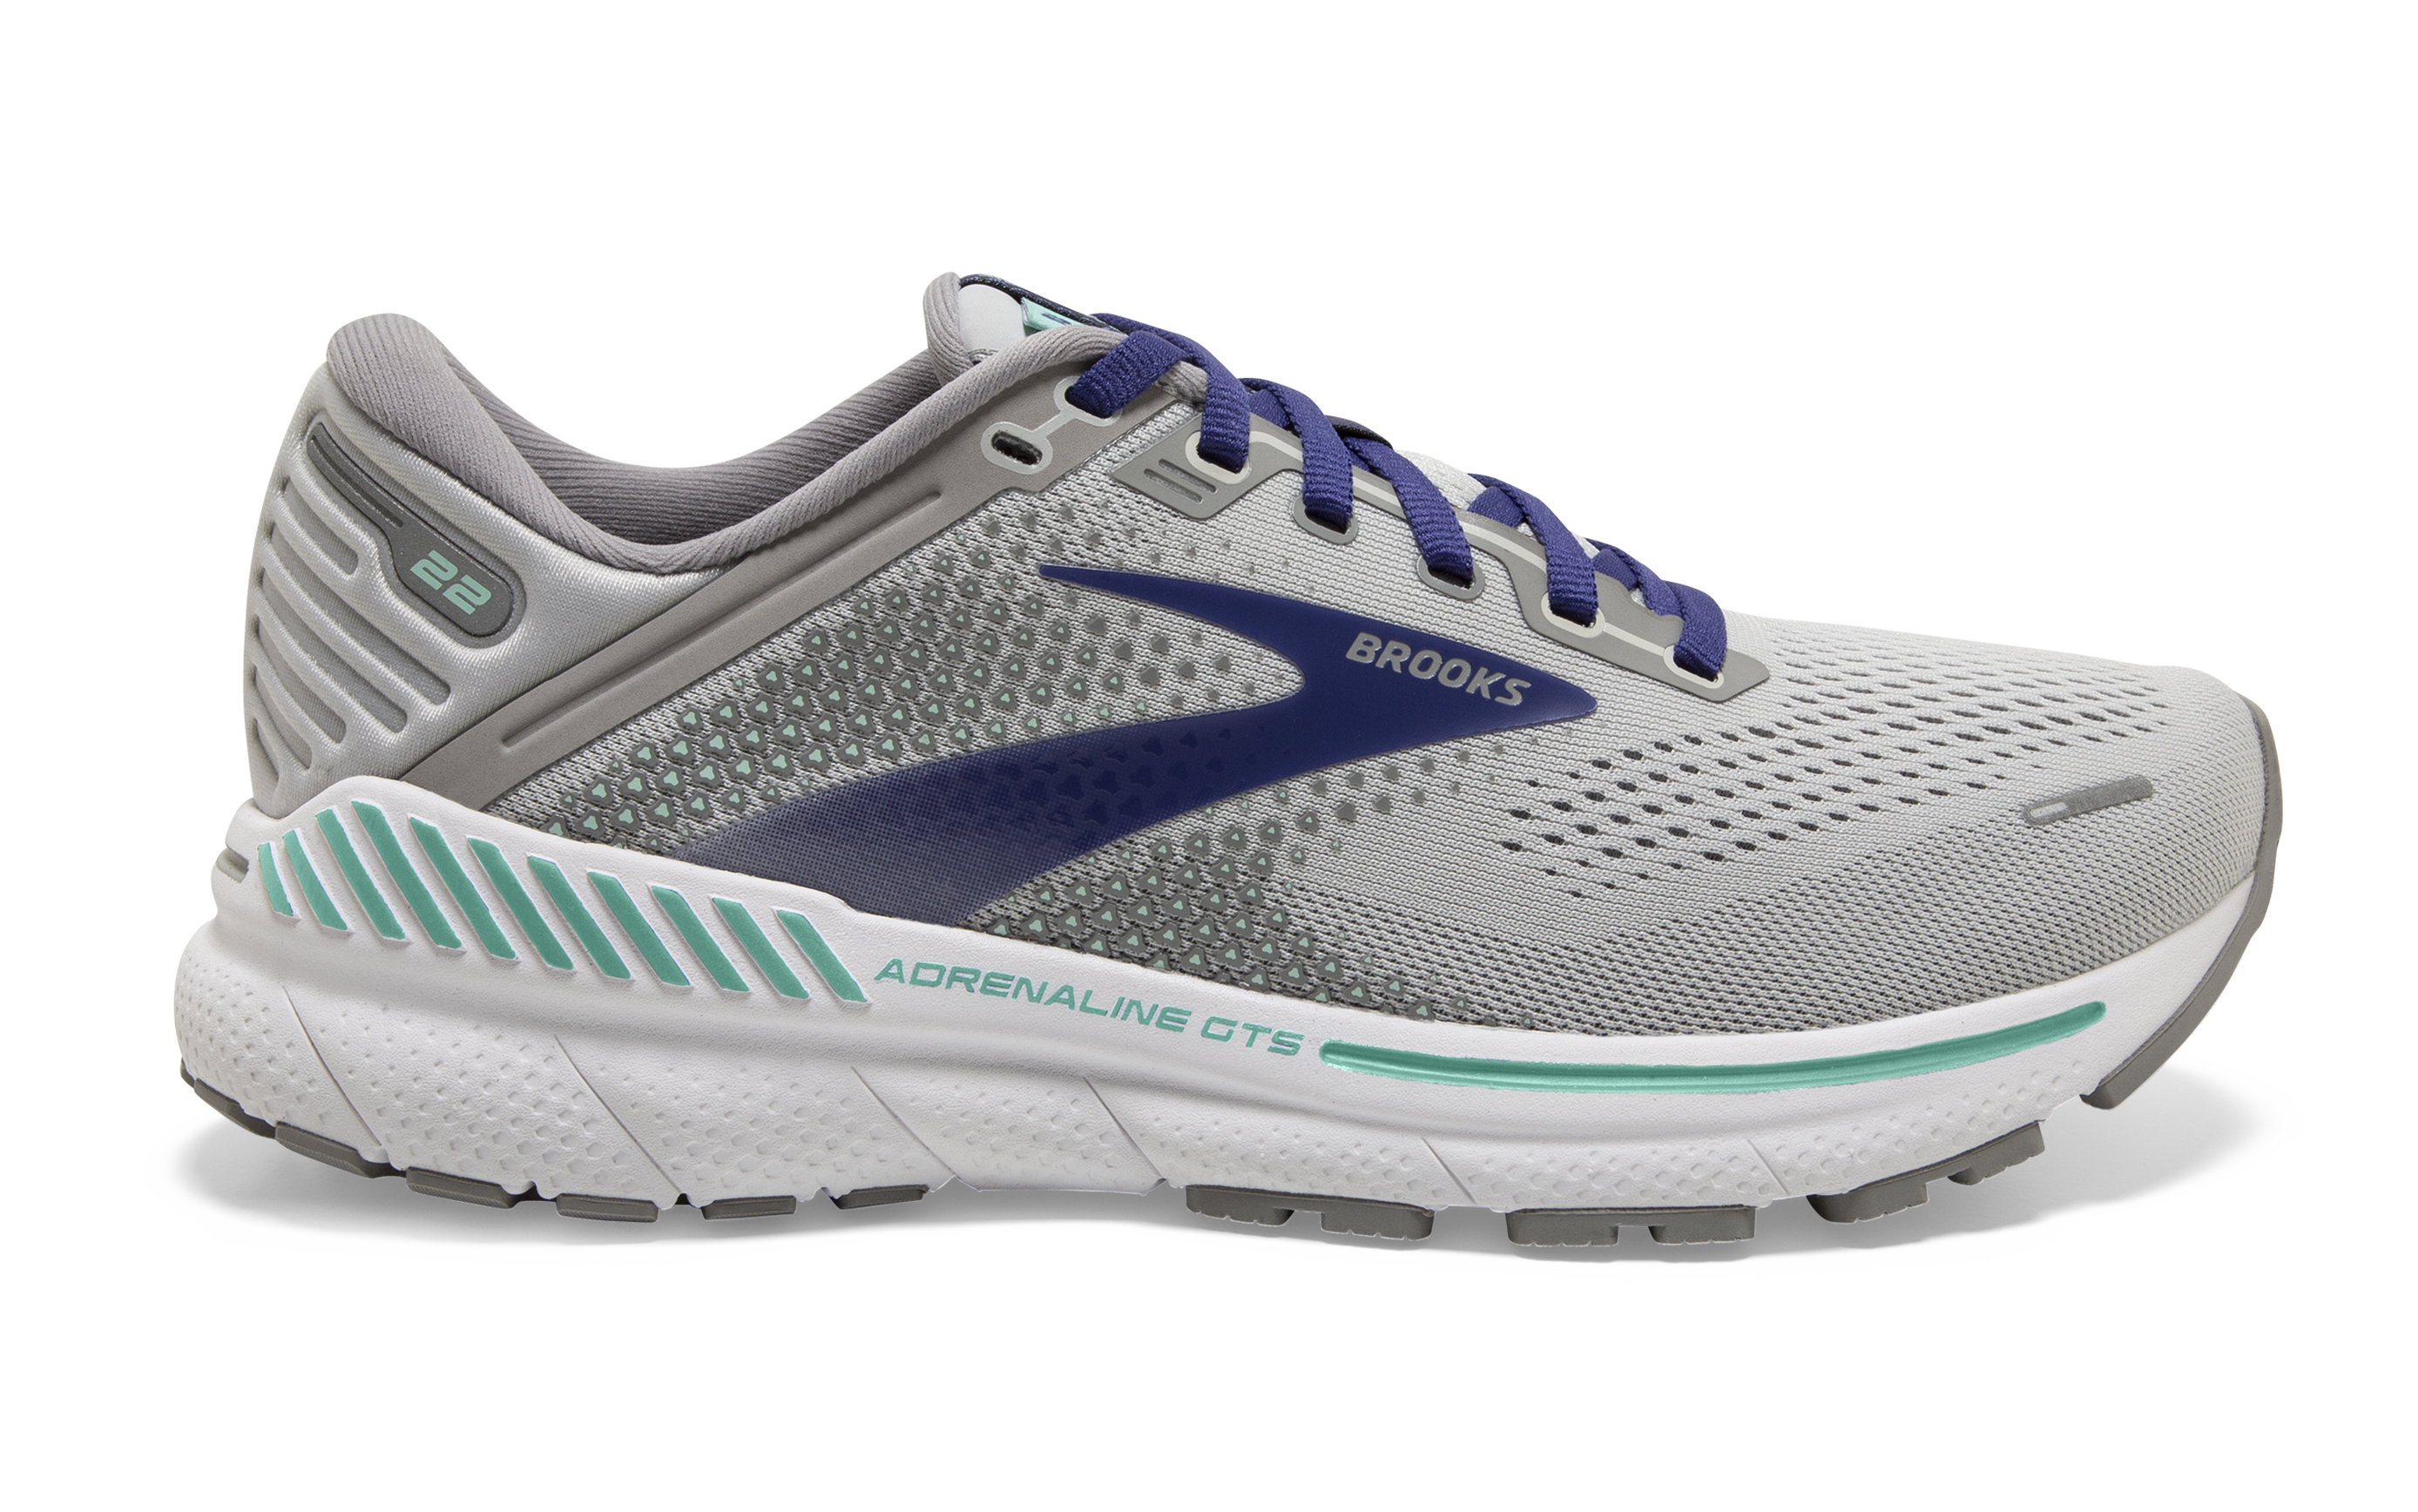 Does Brooks Athletic Shoes Come in 2e Width?